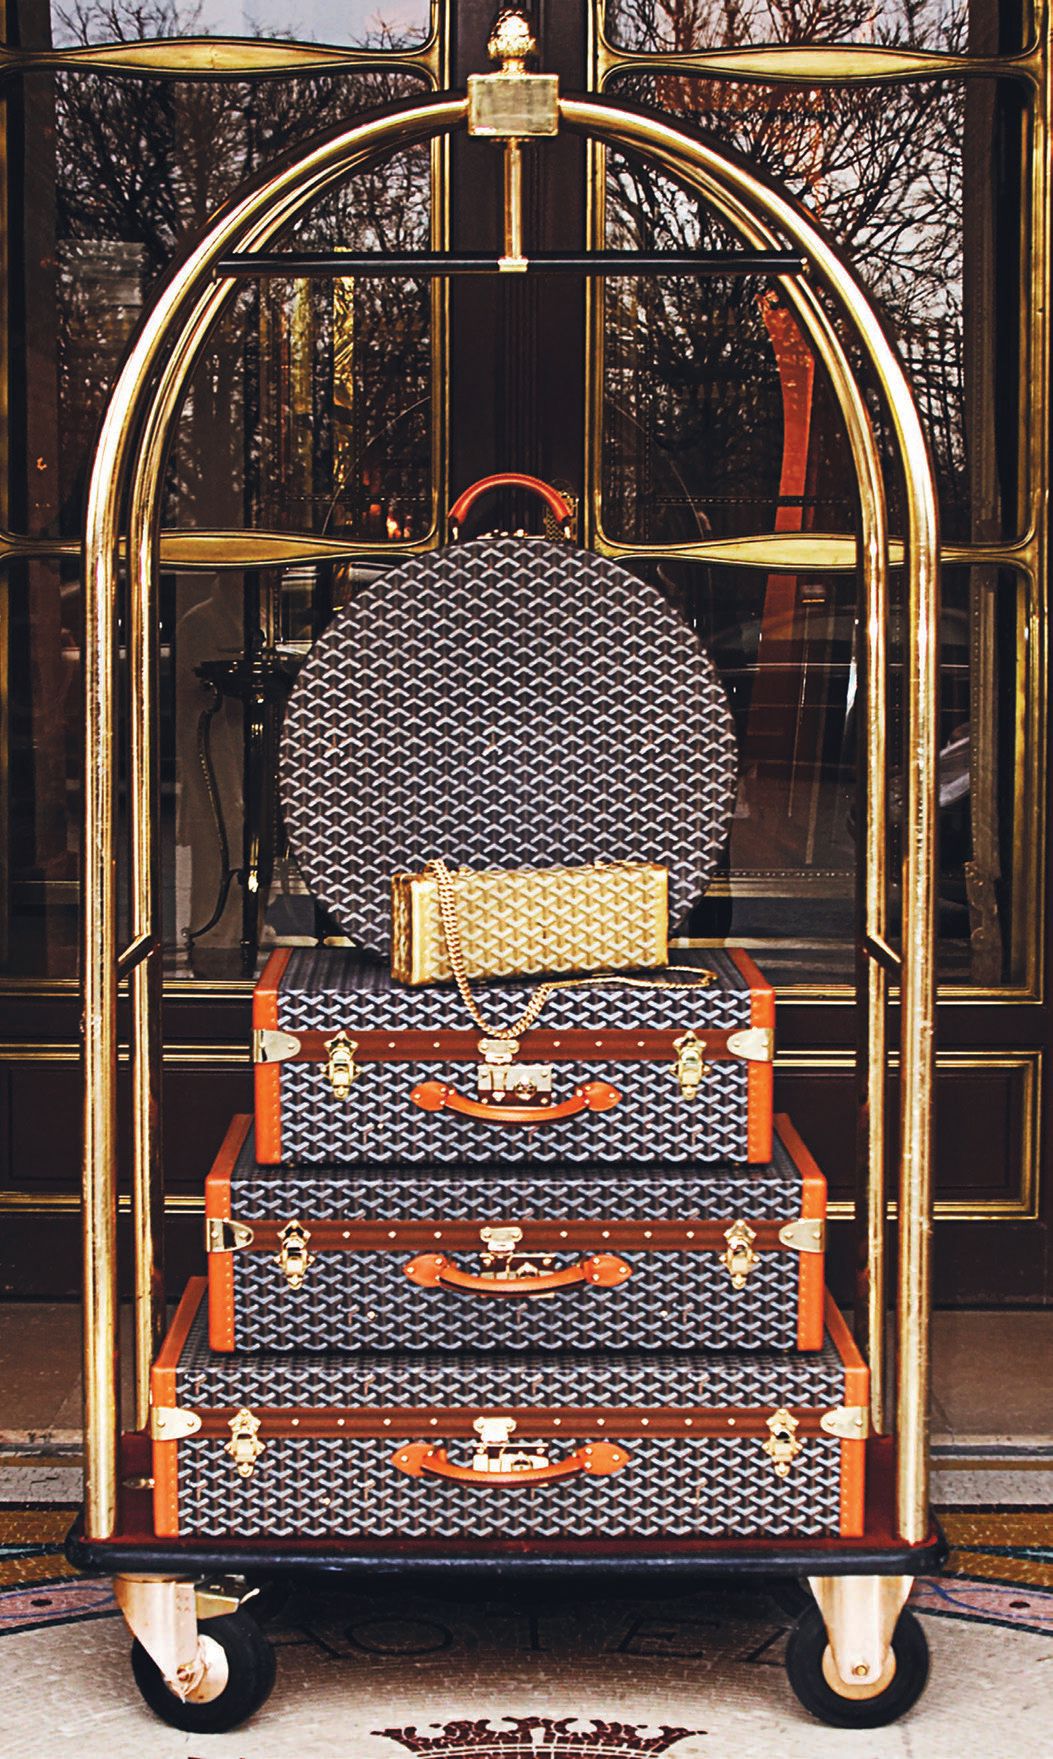 Goyard promises to have your pup traveling in style. GOYARD PHOTO COURTESY OF BRAND